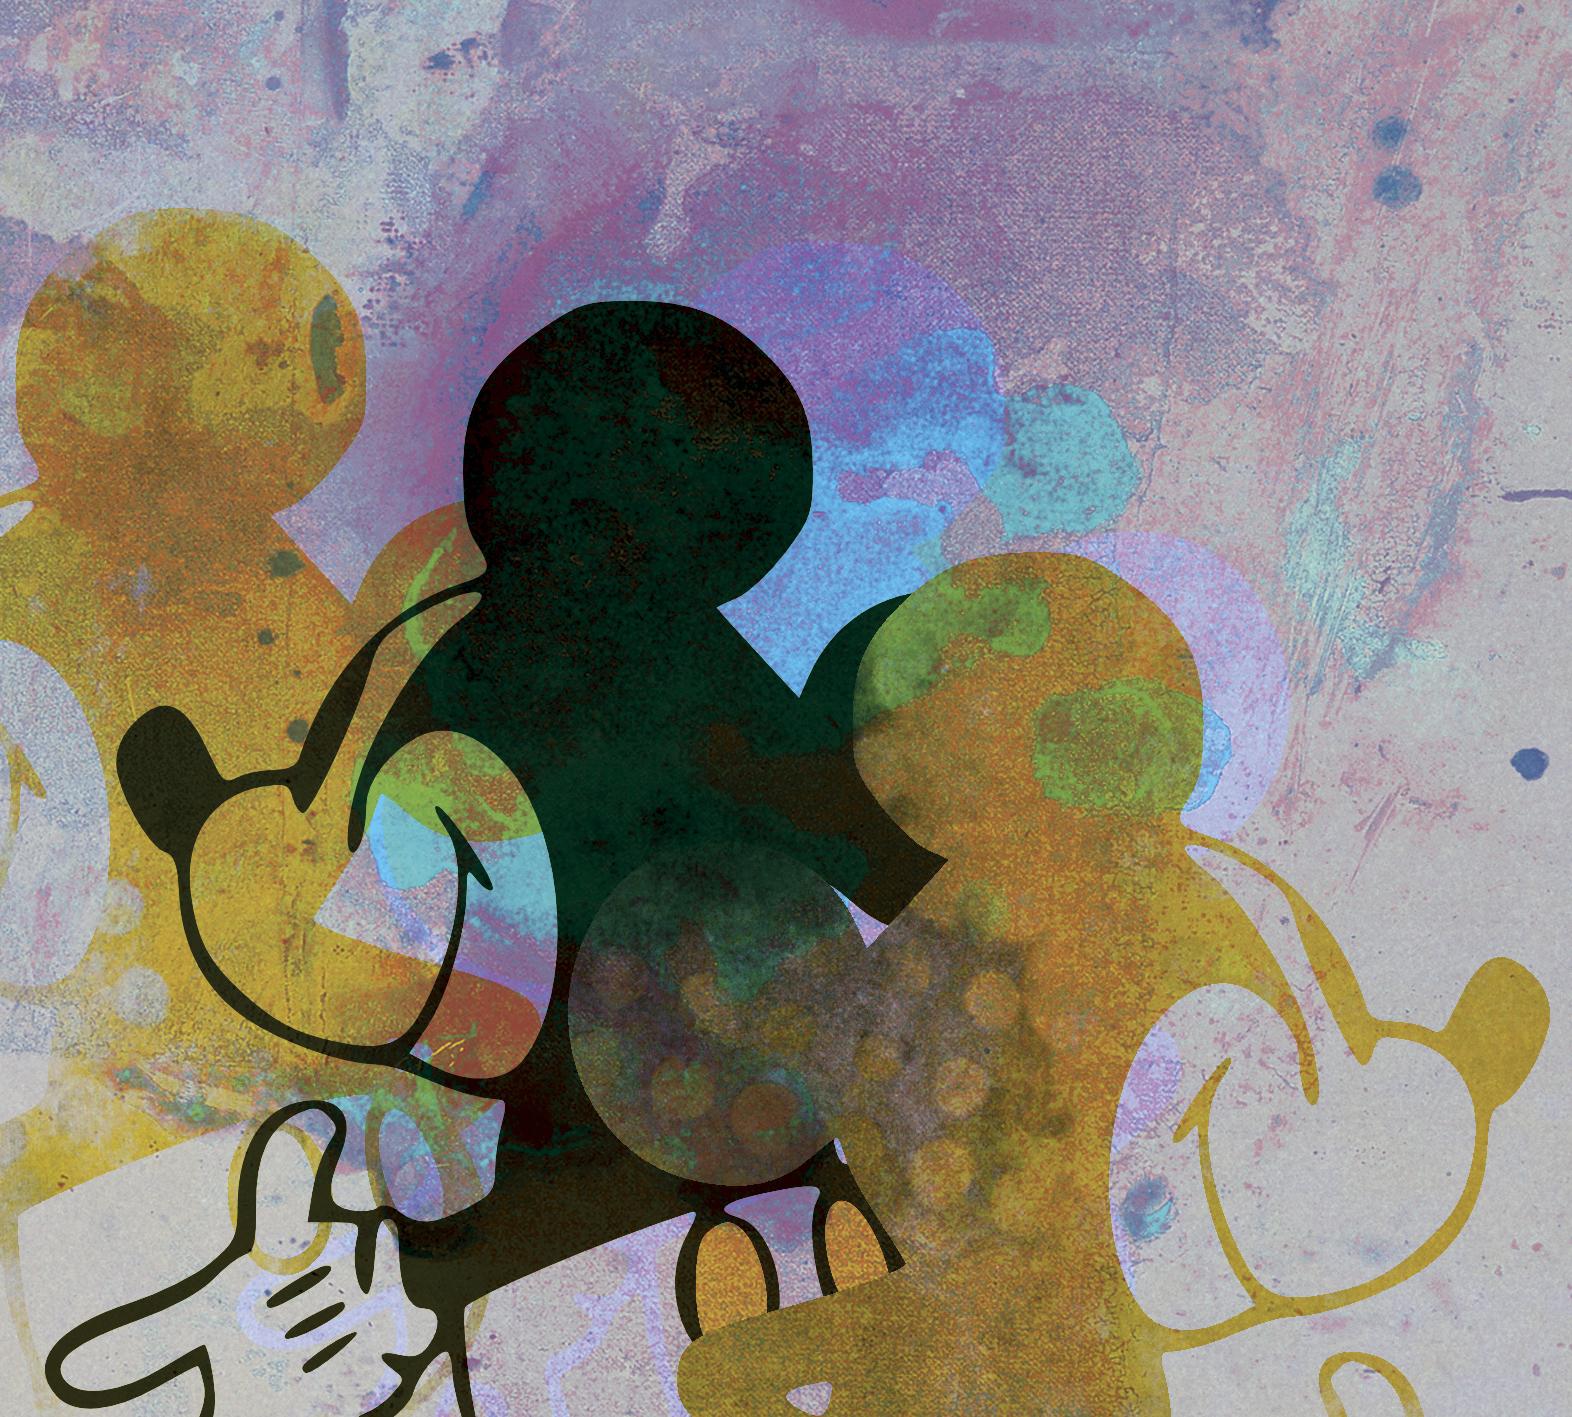 M013-Figurative, Street art, Pop art, Modern, Contemporary Abstract Mickey Mouse - Print by Francisco Nicolás